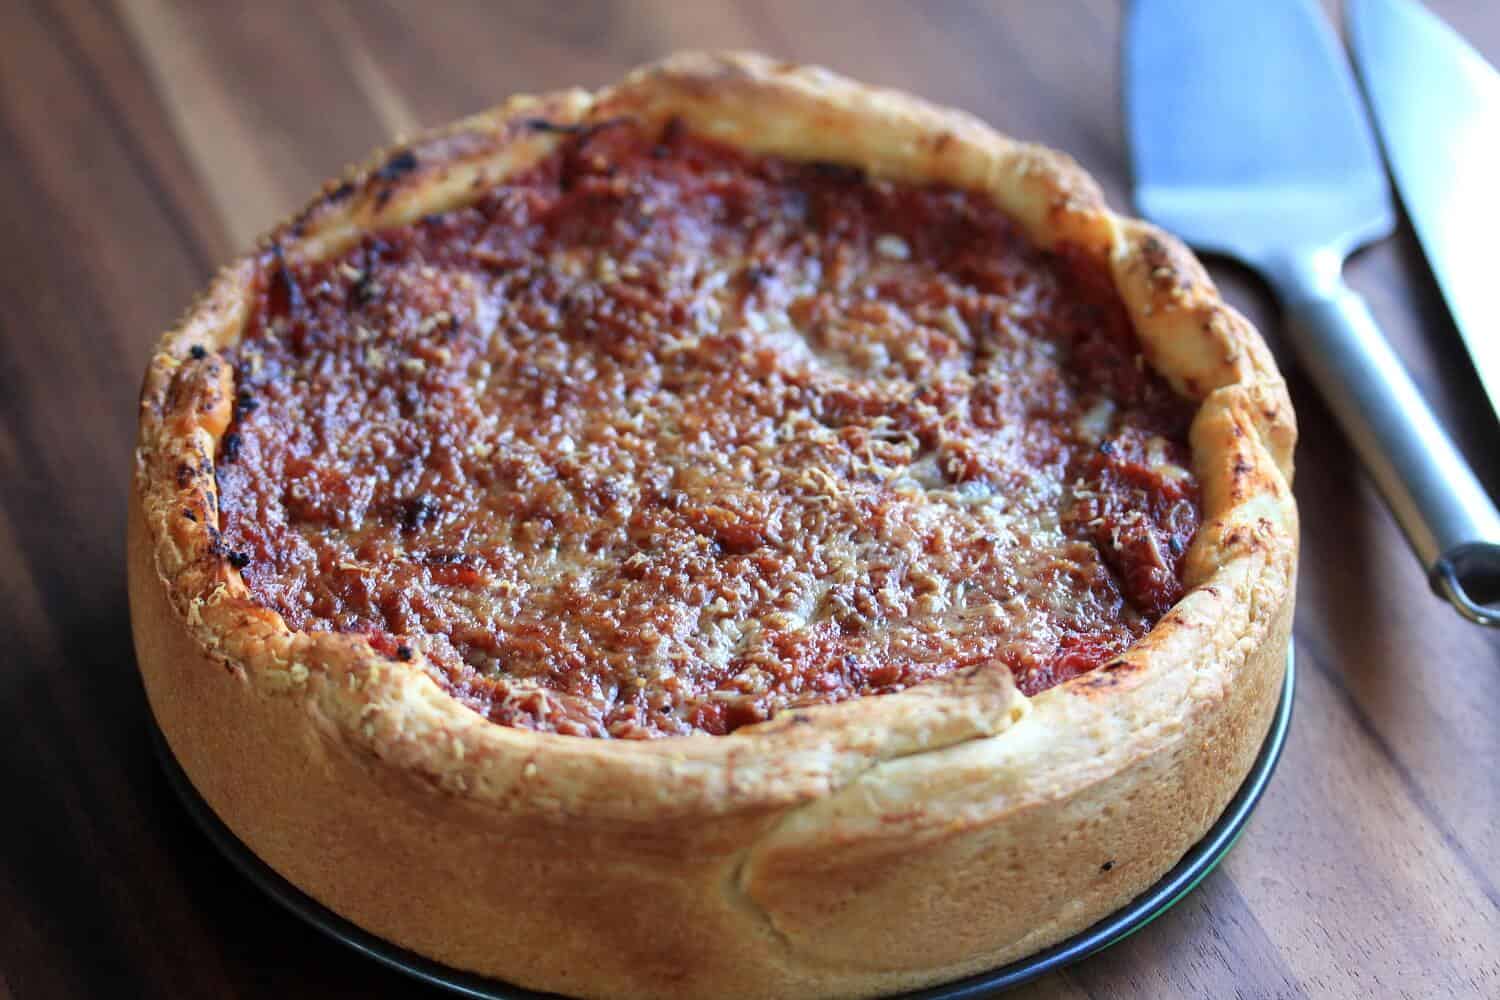 A whole Chicago deep dish pizza on a wooden board.